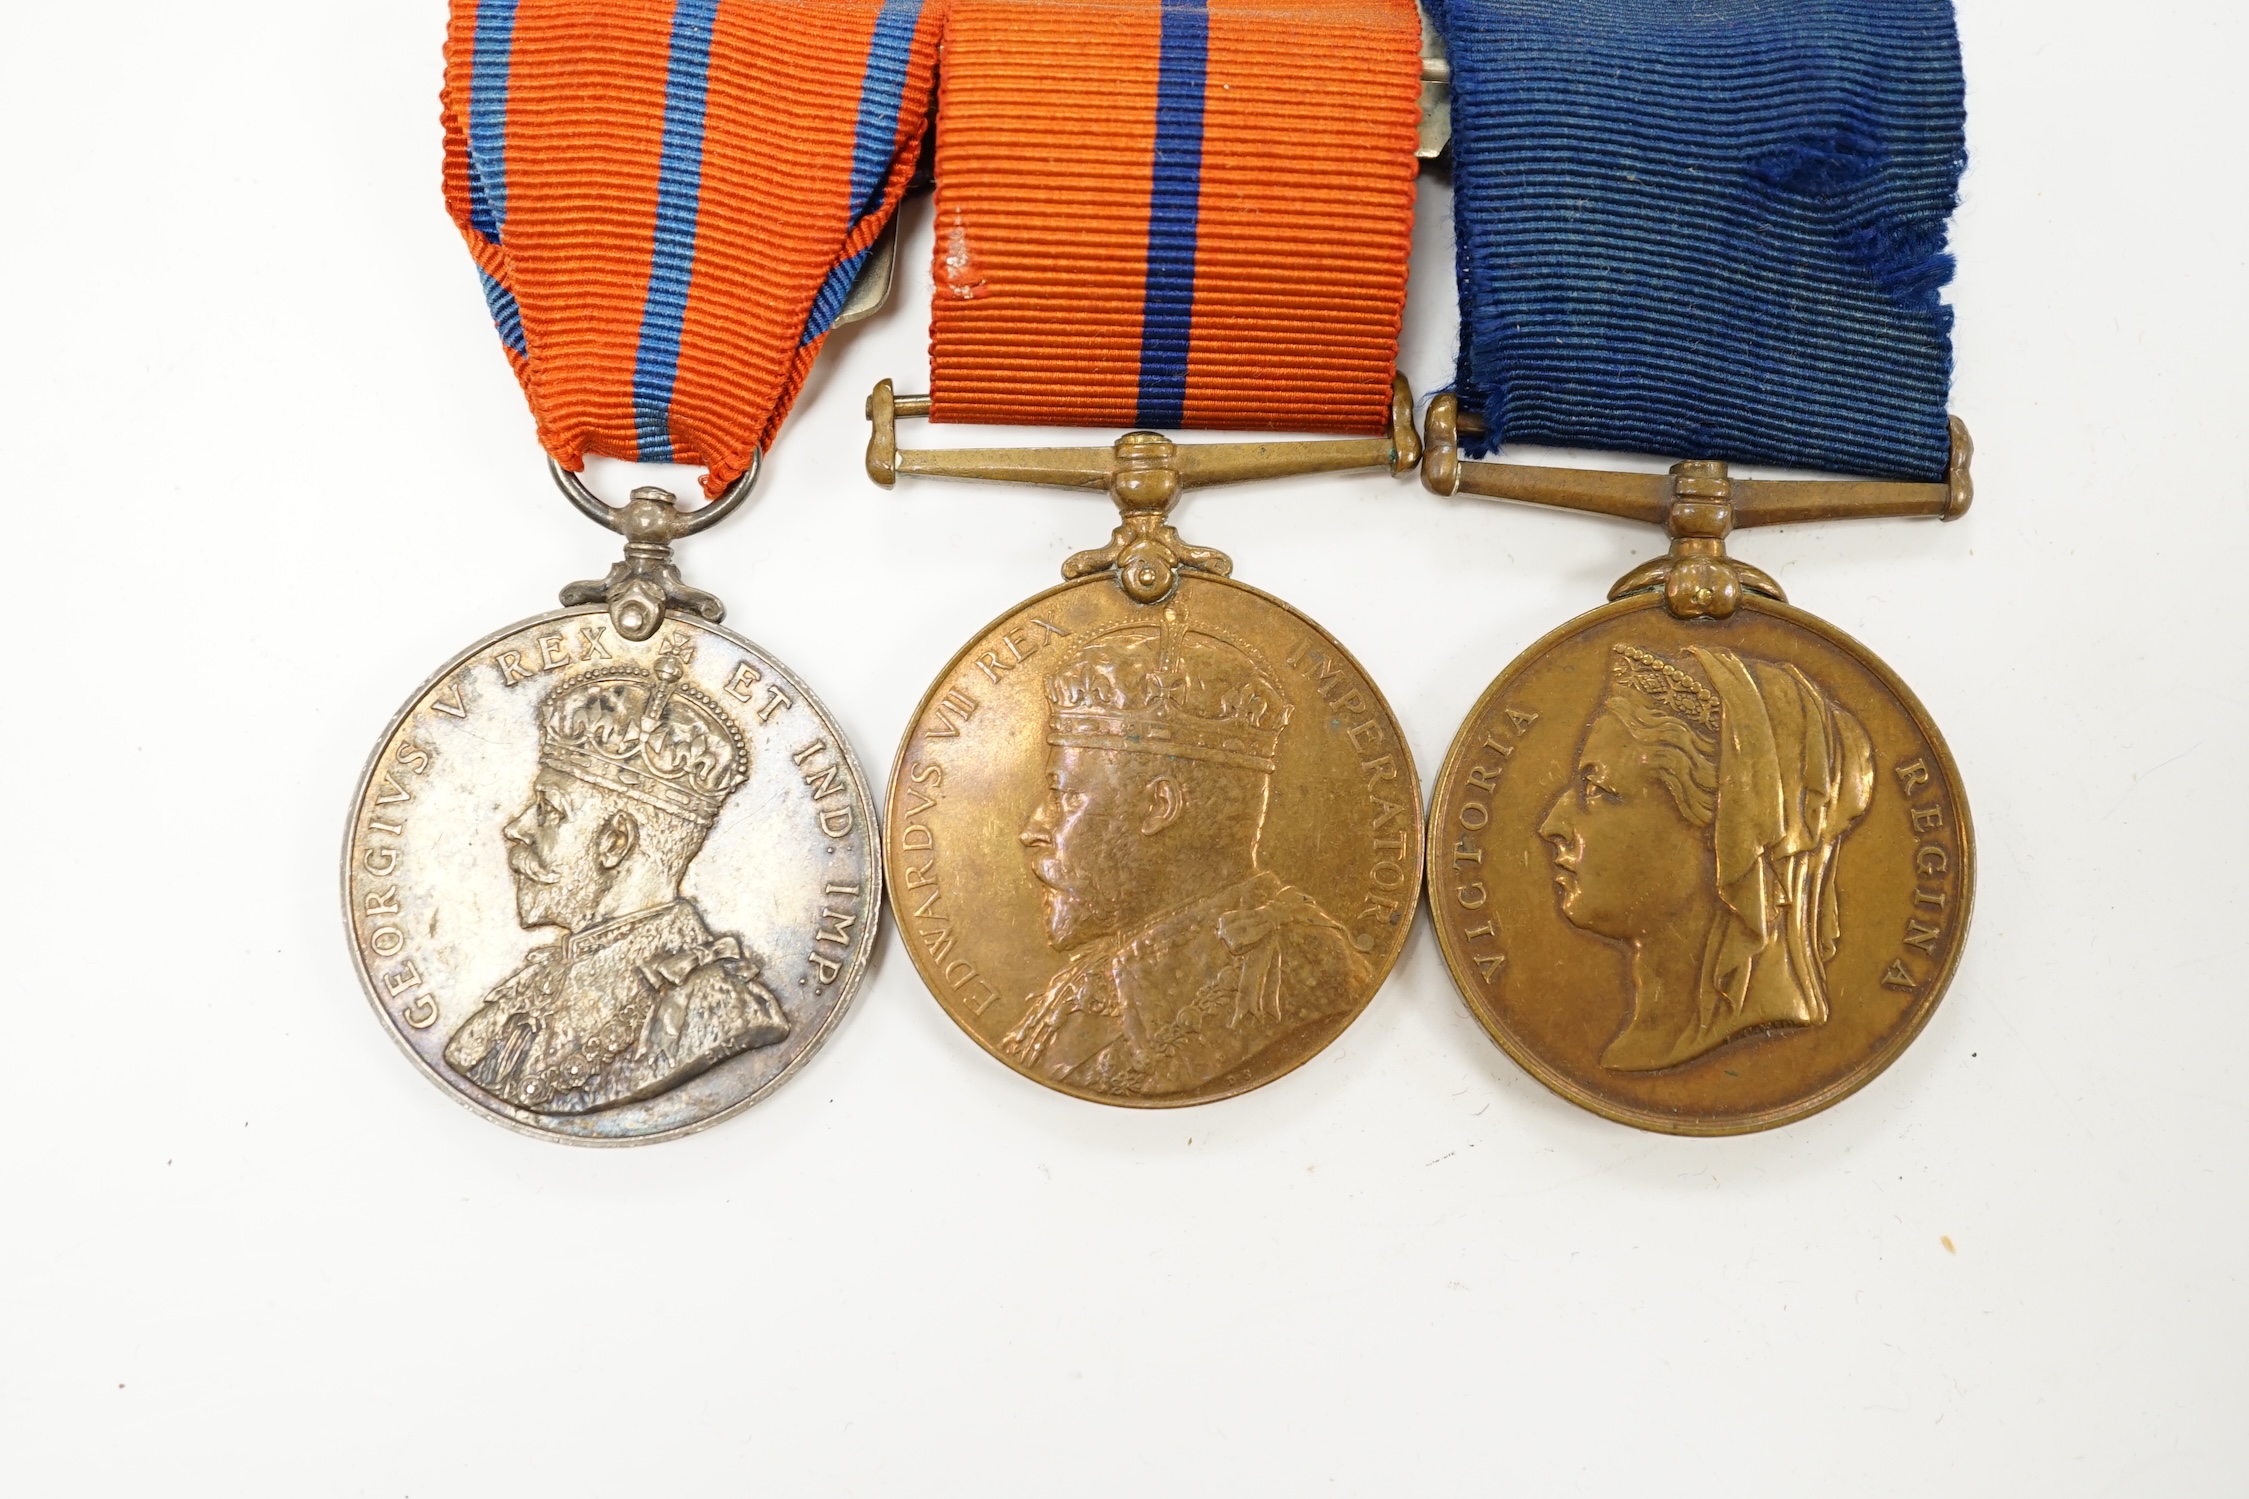 A Metropolitan police medal group awarded to James W. Sidders comprising of three commemorative medals; the 1887 Golden Jubilee medal, the 1902 Edward VII Coronation medal and the 1911 George V Coronation medal, together